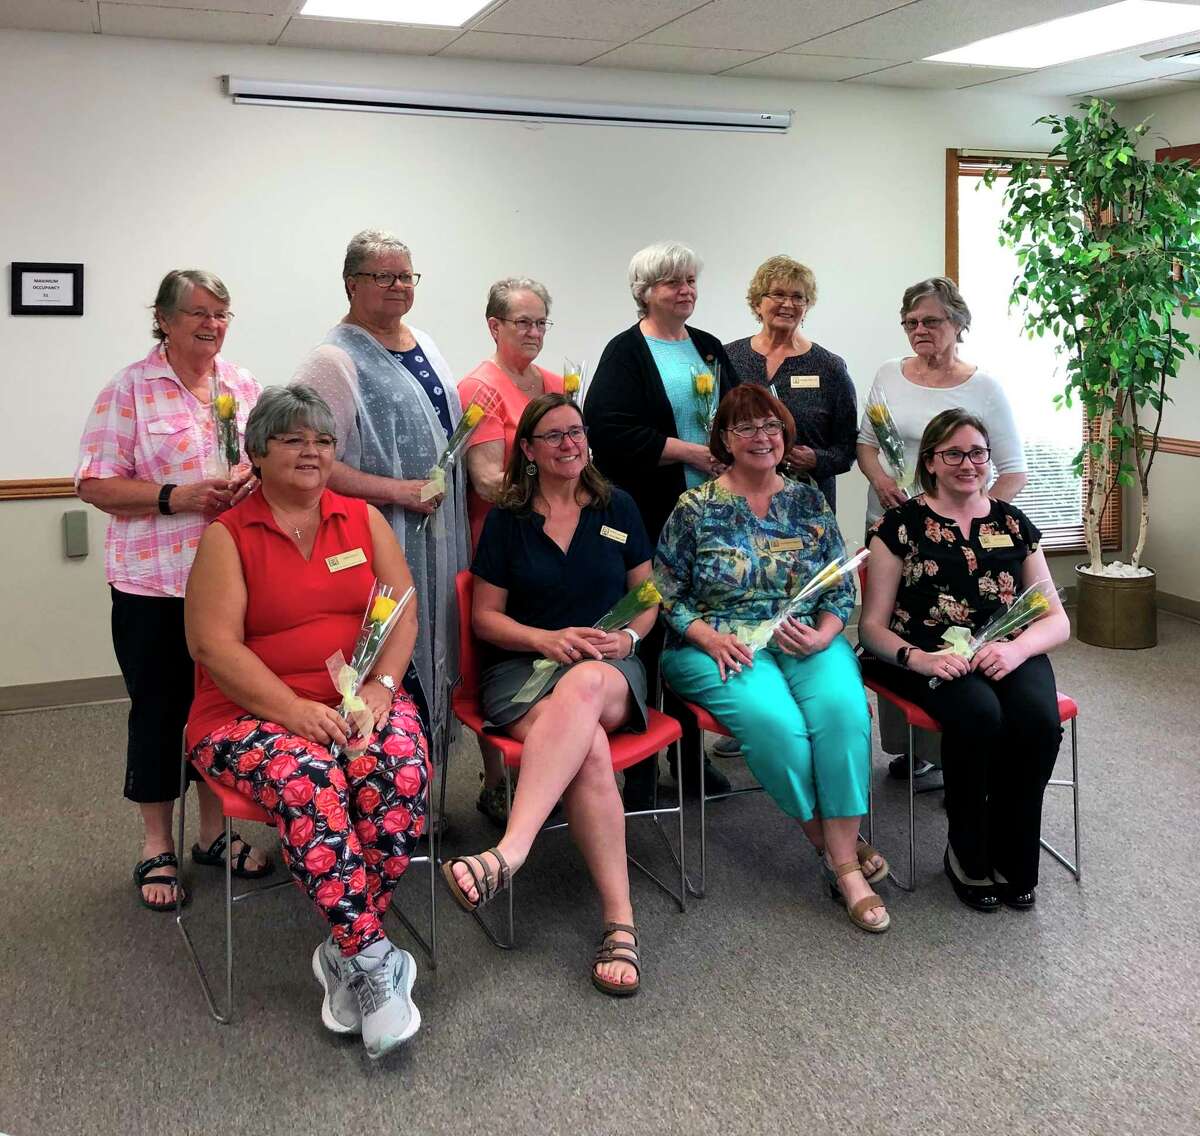 The new officers for Benzie Area Zonta for 2021-2023 include (front row, left to right) Cindy Ooley, 2nd vice president; Julie Bretzke, immediate past president; Rosemary Naulty, president; Tia Cooley, first vice president; (back row) Linda Nugent, board of directors; Donna Clarke, secretary; Lucy Wright, treasurer; Marianne Fleetwood; Dianna Heller, Vicki Sager, board of directors. (Courtesy Photo)